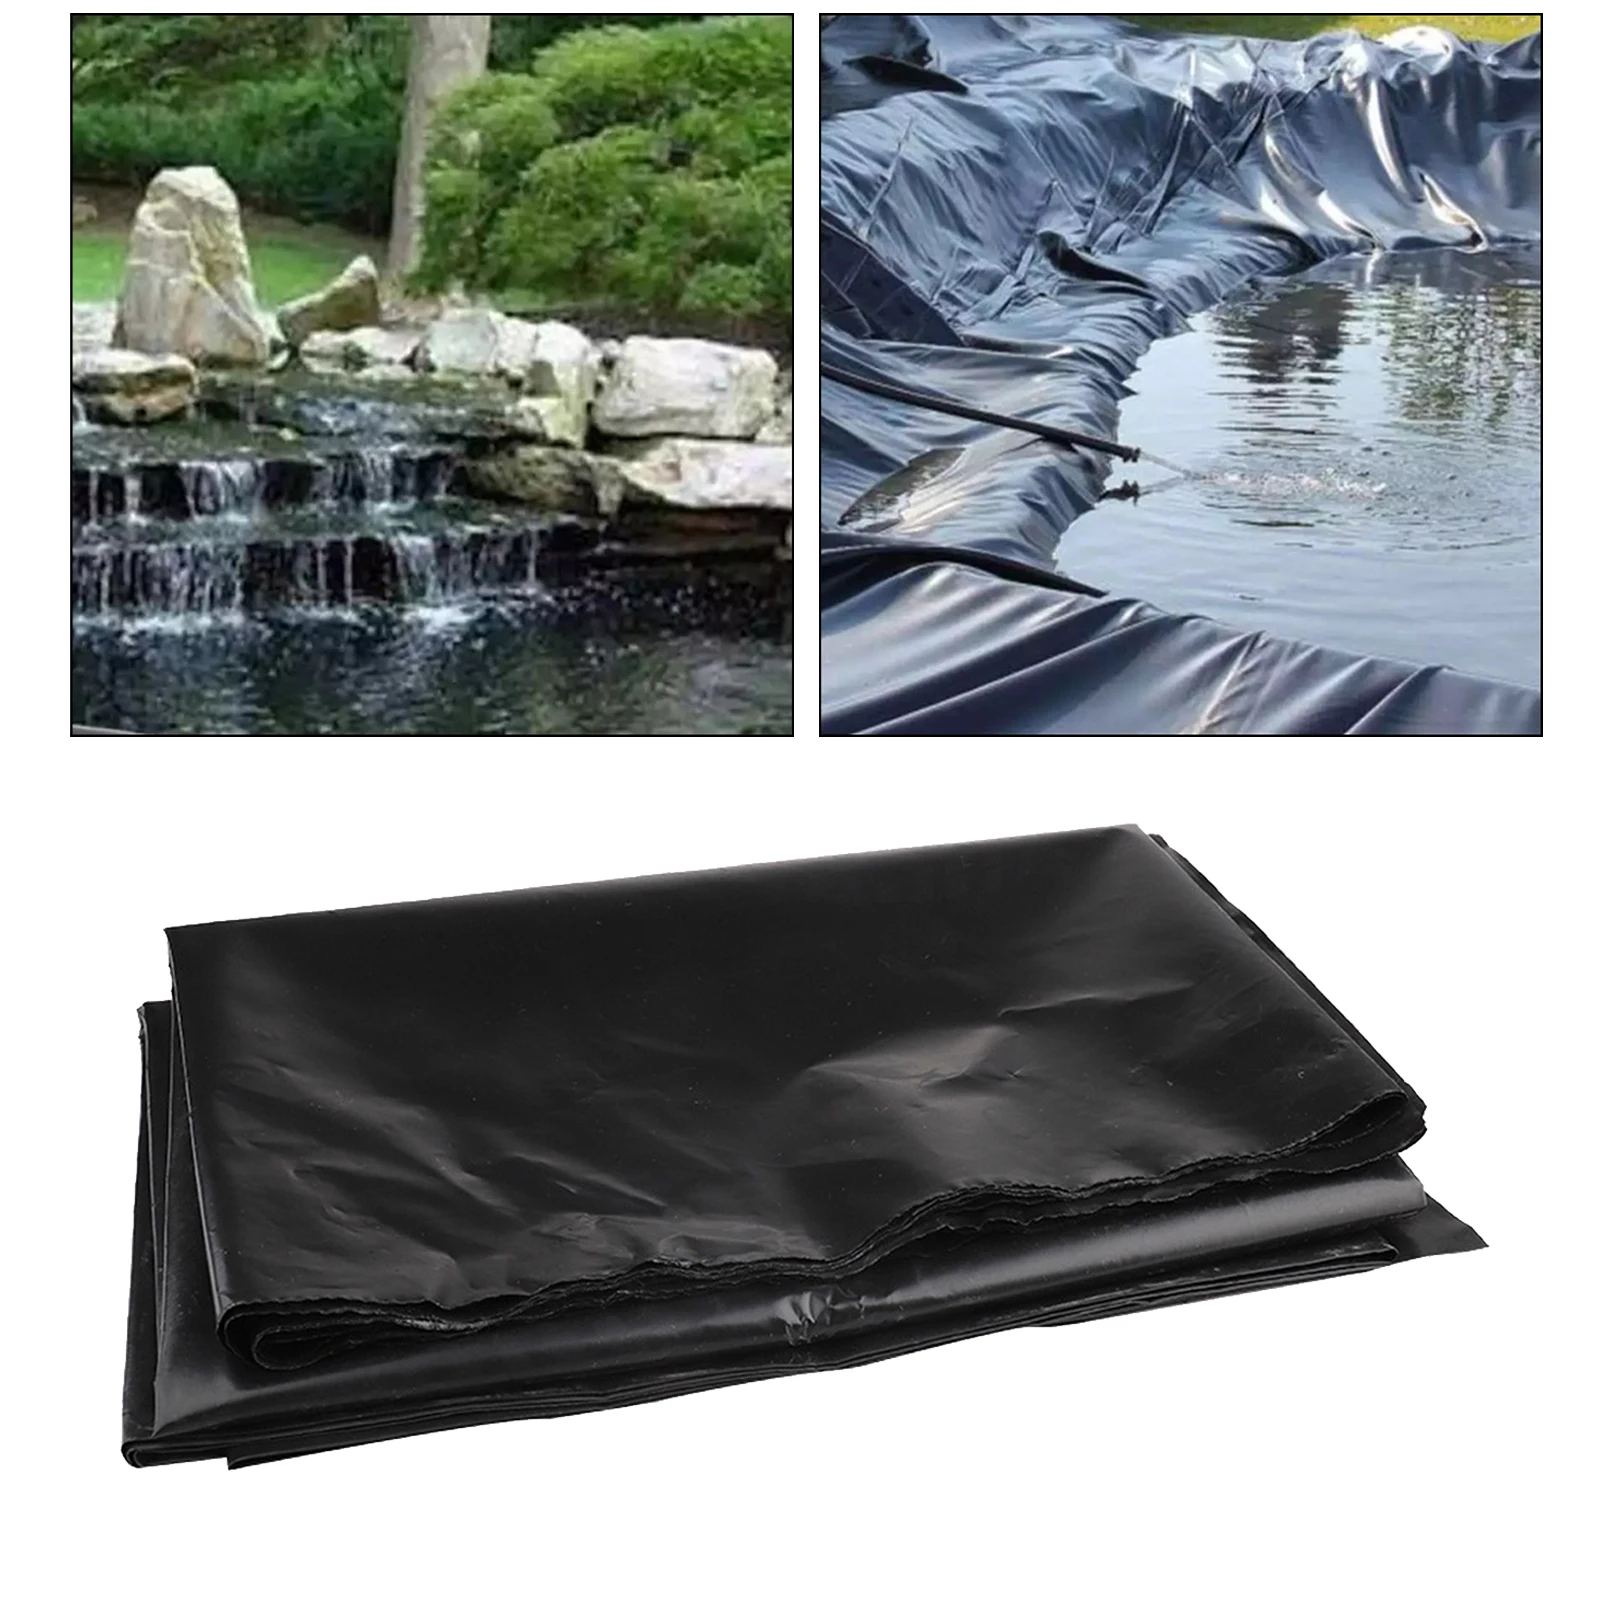 Fish Pond Liner Garden Pool Film Fish Pond Liner Cloth for Fish Ponds,Water Features,Fountains,Waterfall and Water Gardens